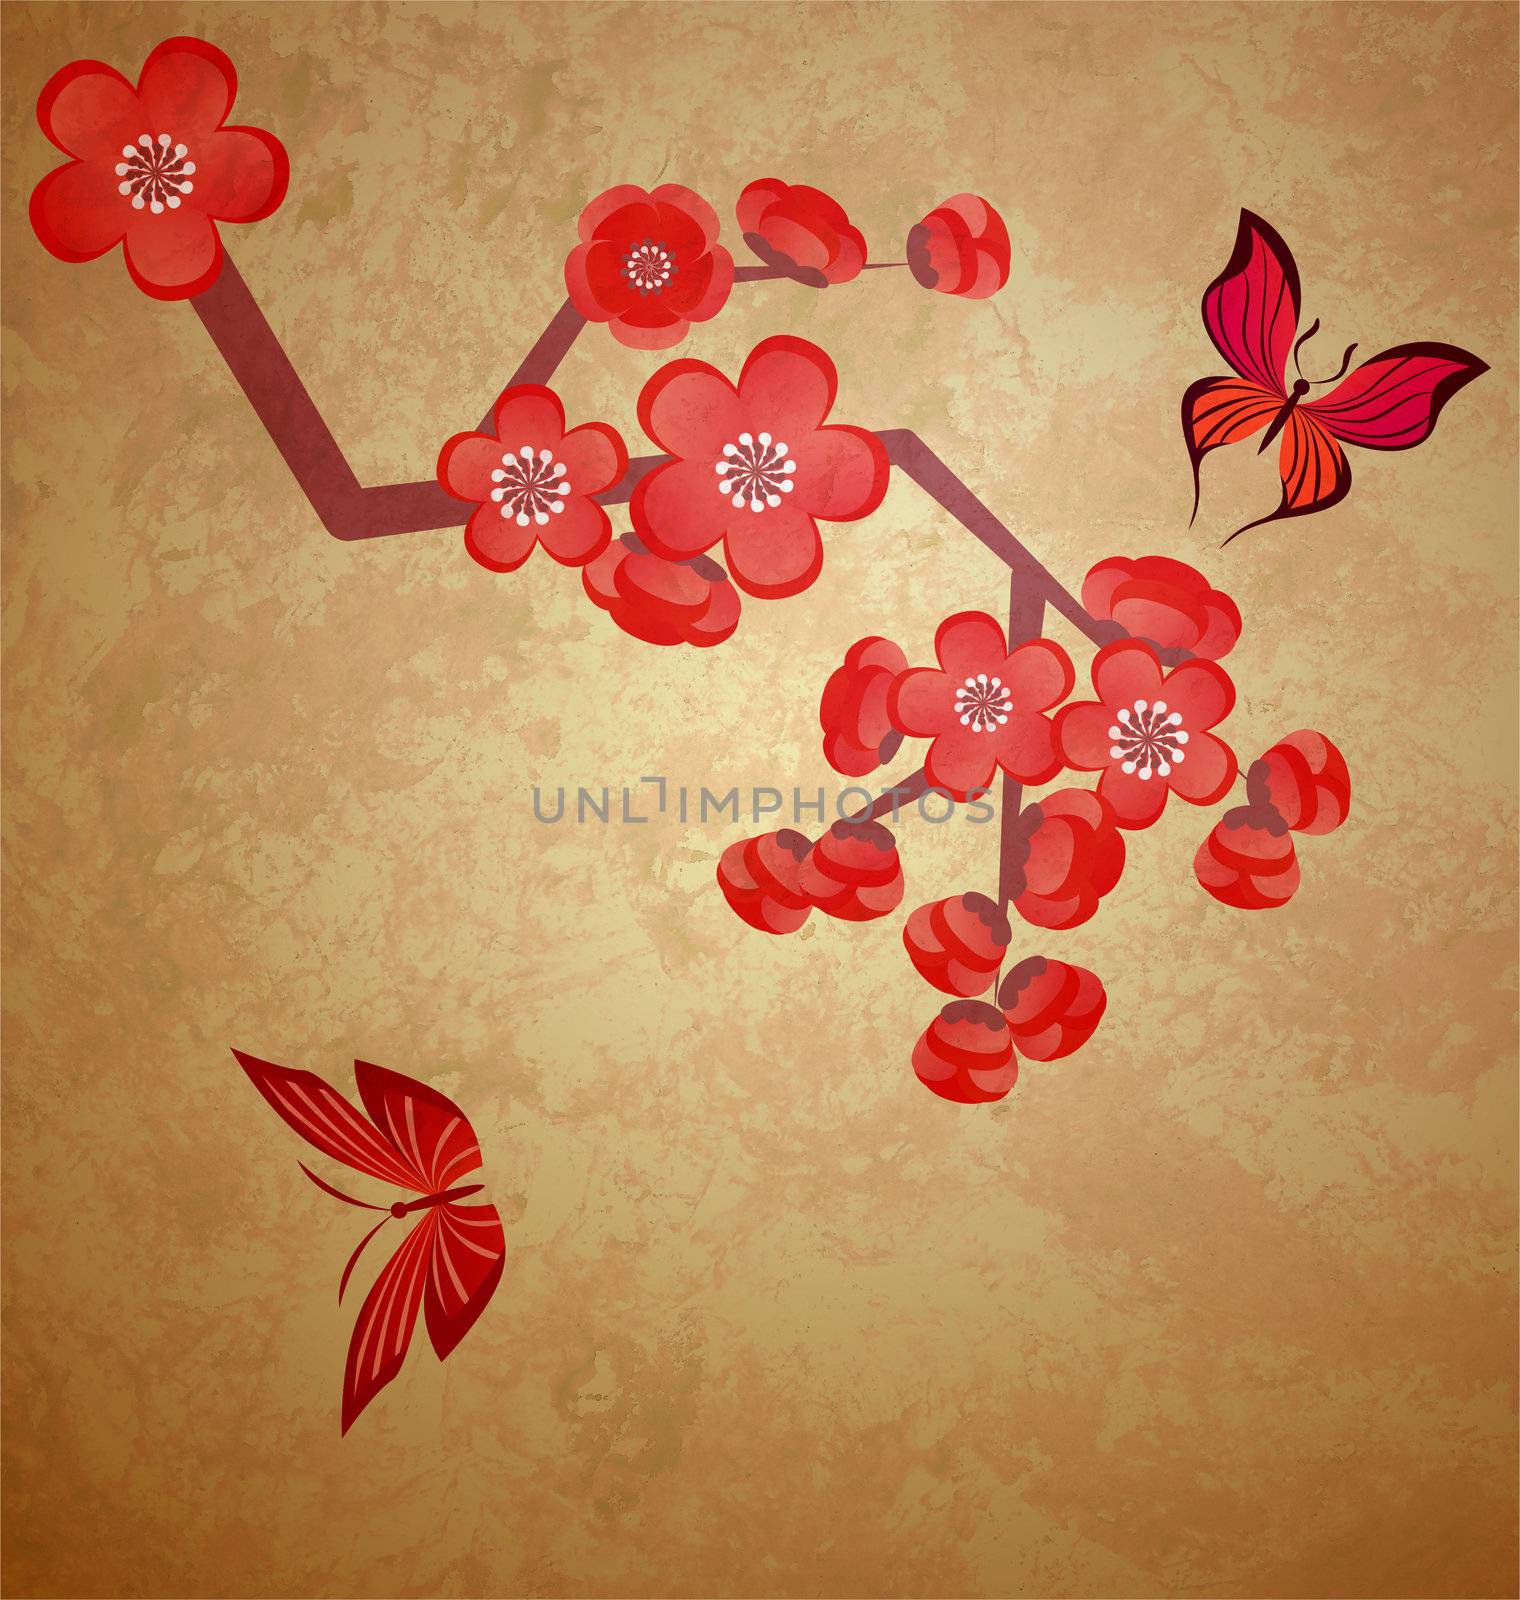 blossoming tree illustration on grunge old paper background